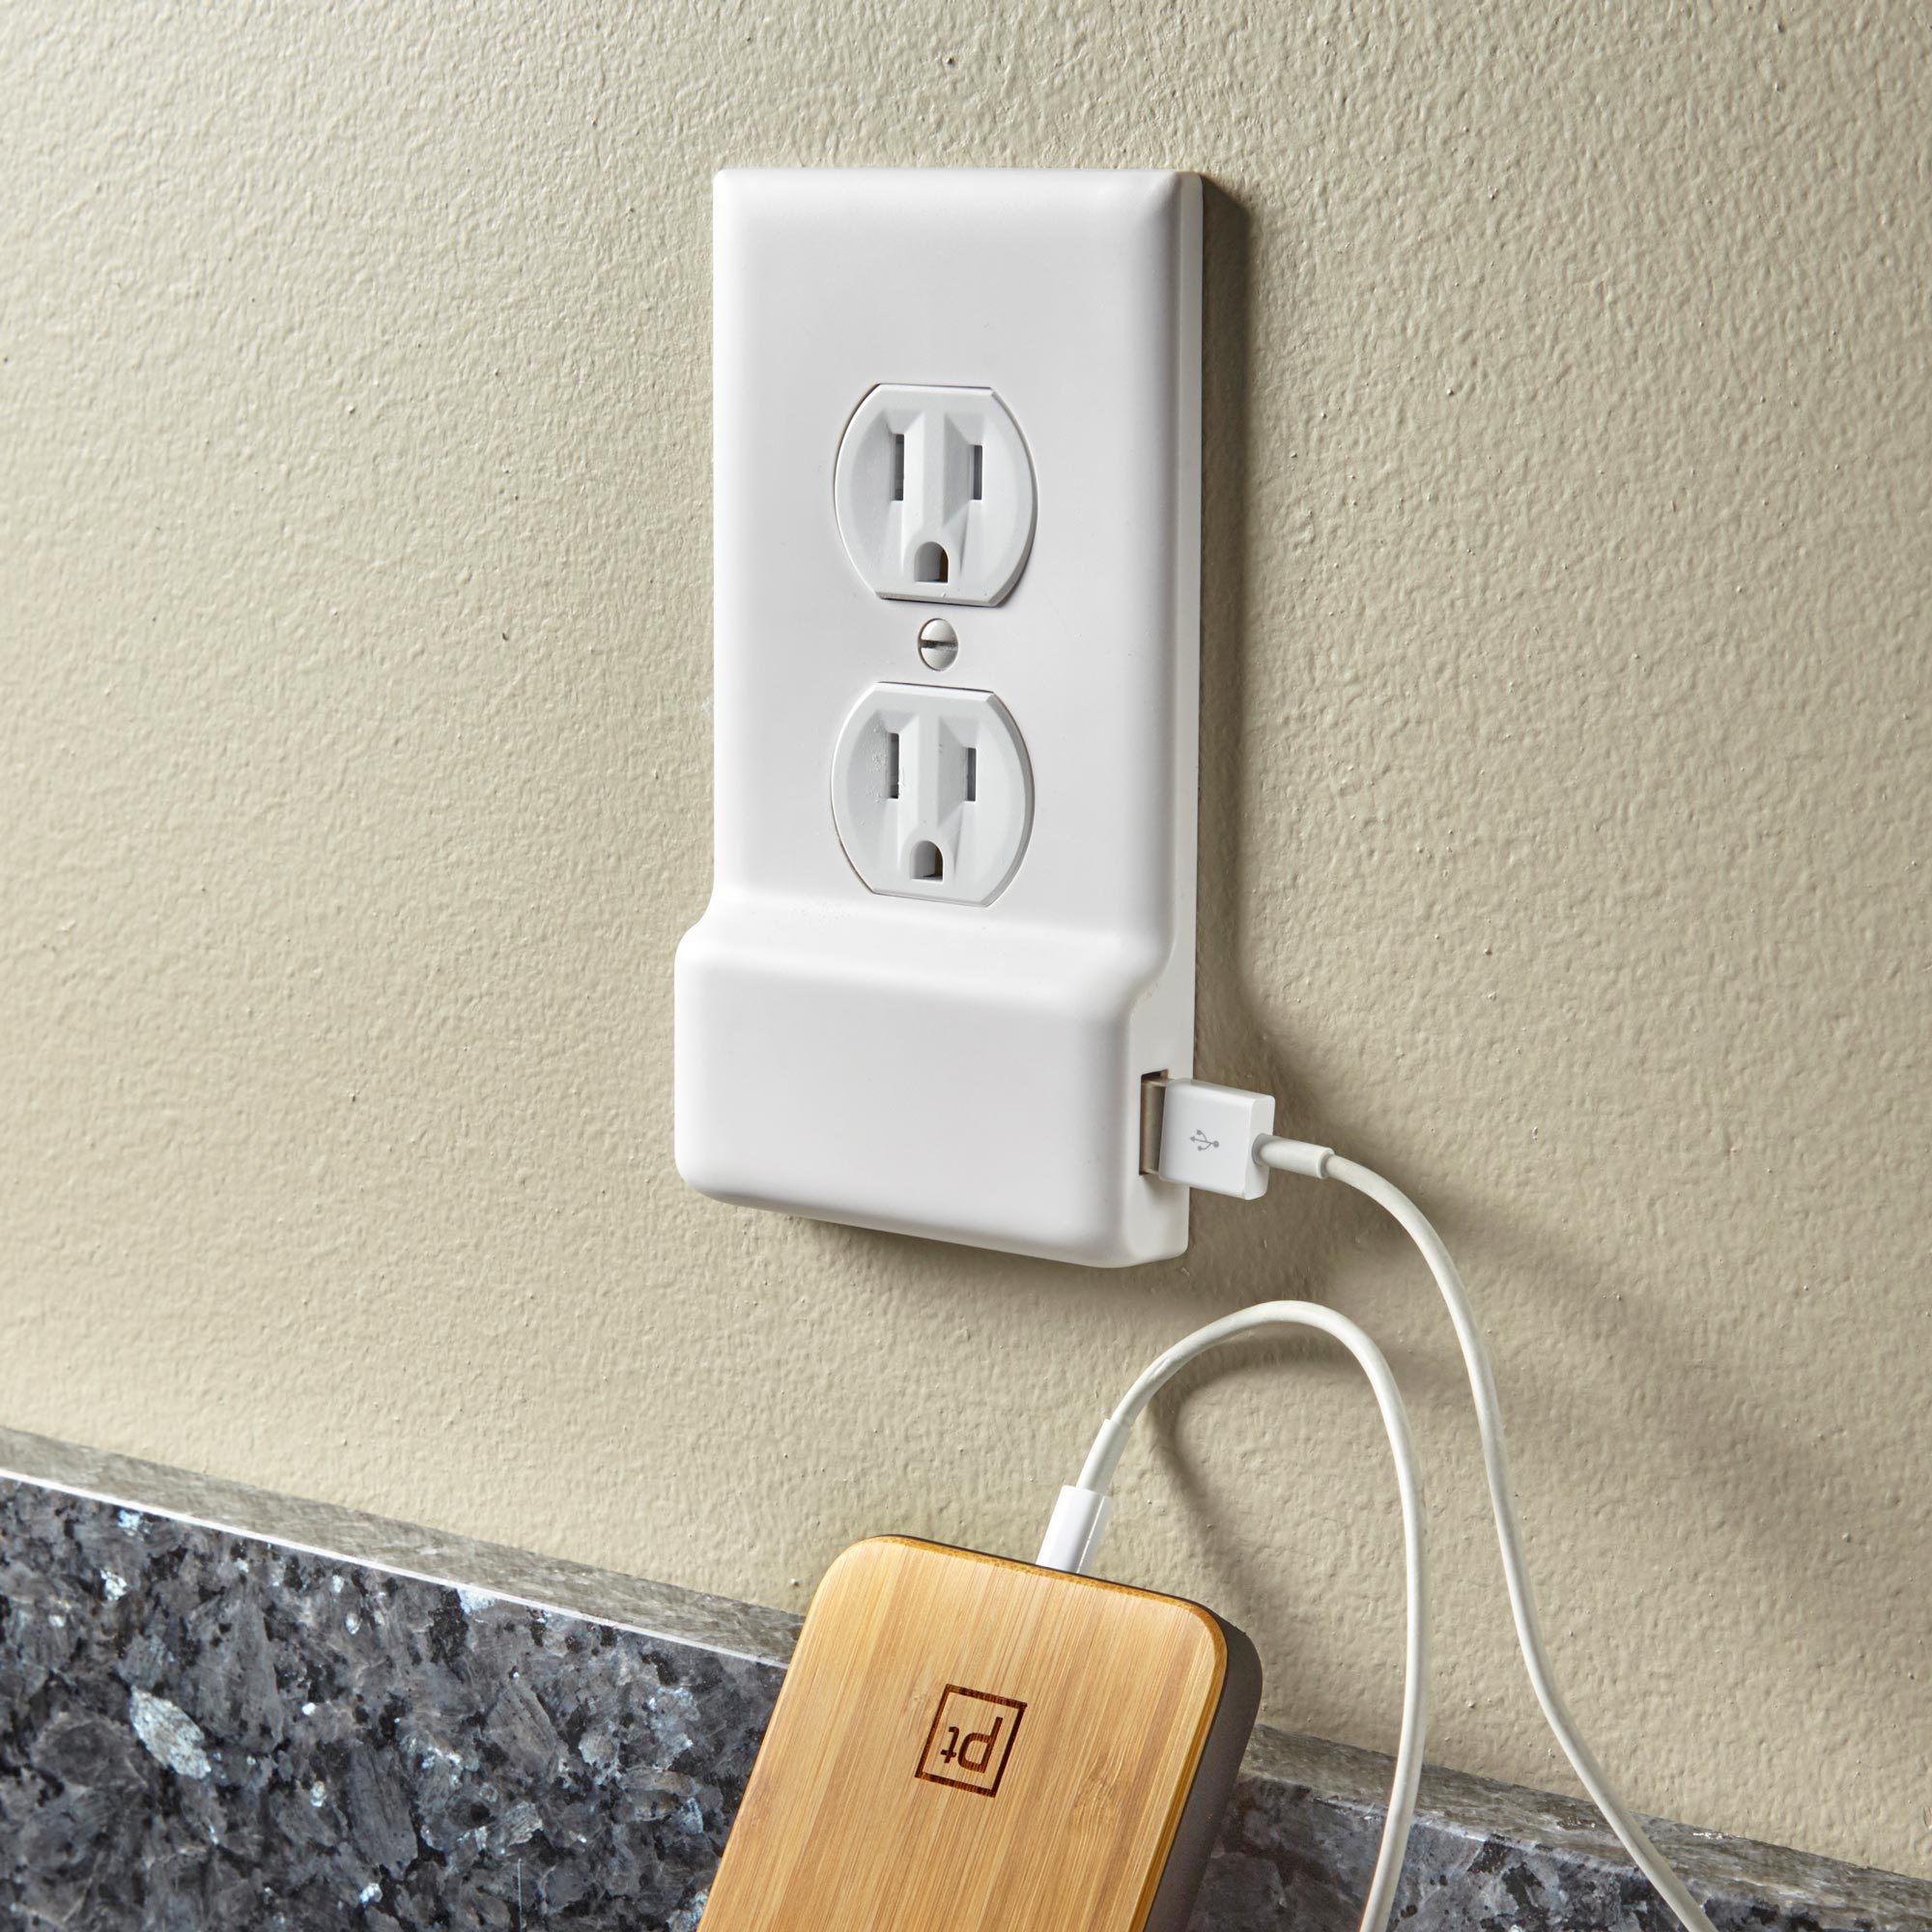 Outlet Cover Plate With Built In Usb Port